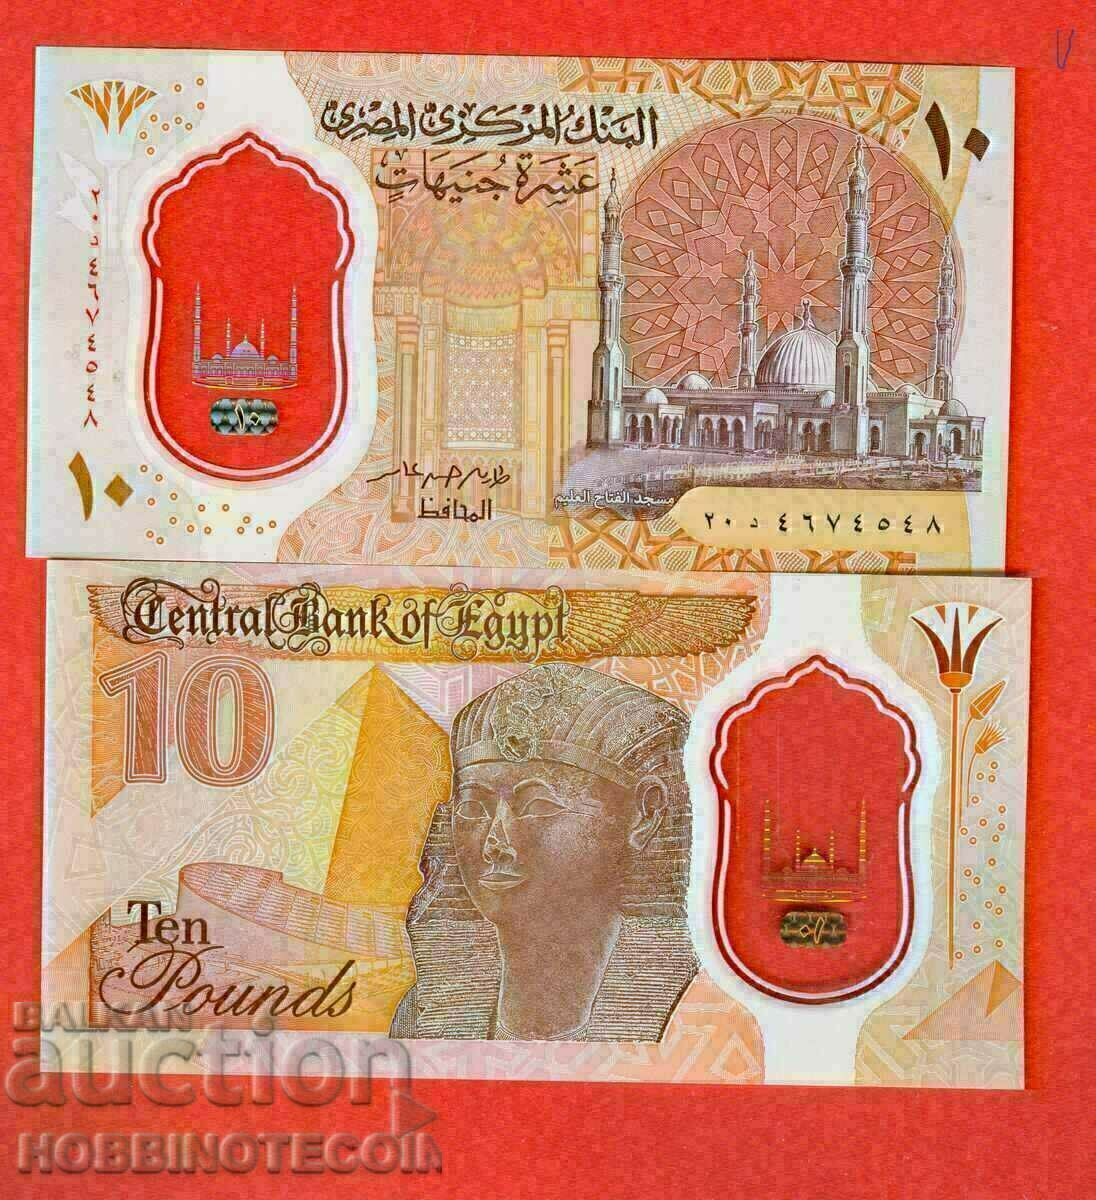 EGYPT EGYPT 10 issue issue 2022 - POLYMER NEW UNC